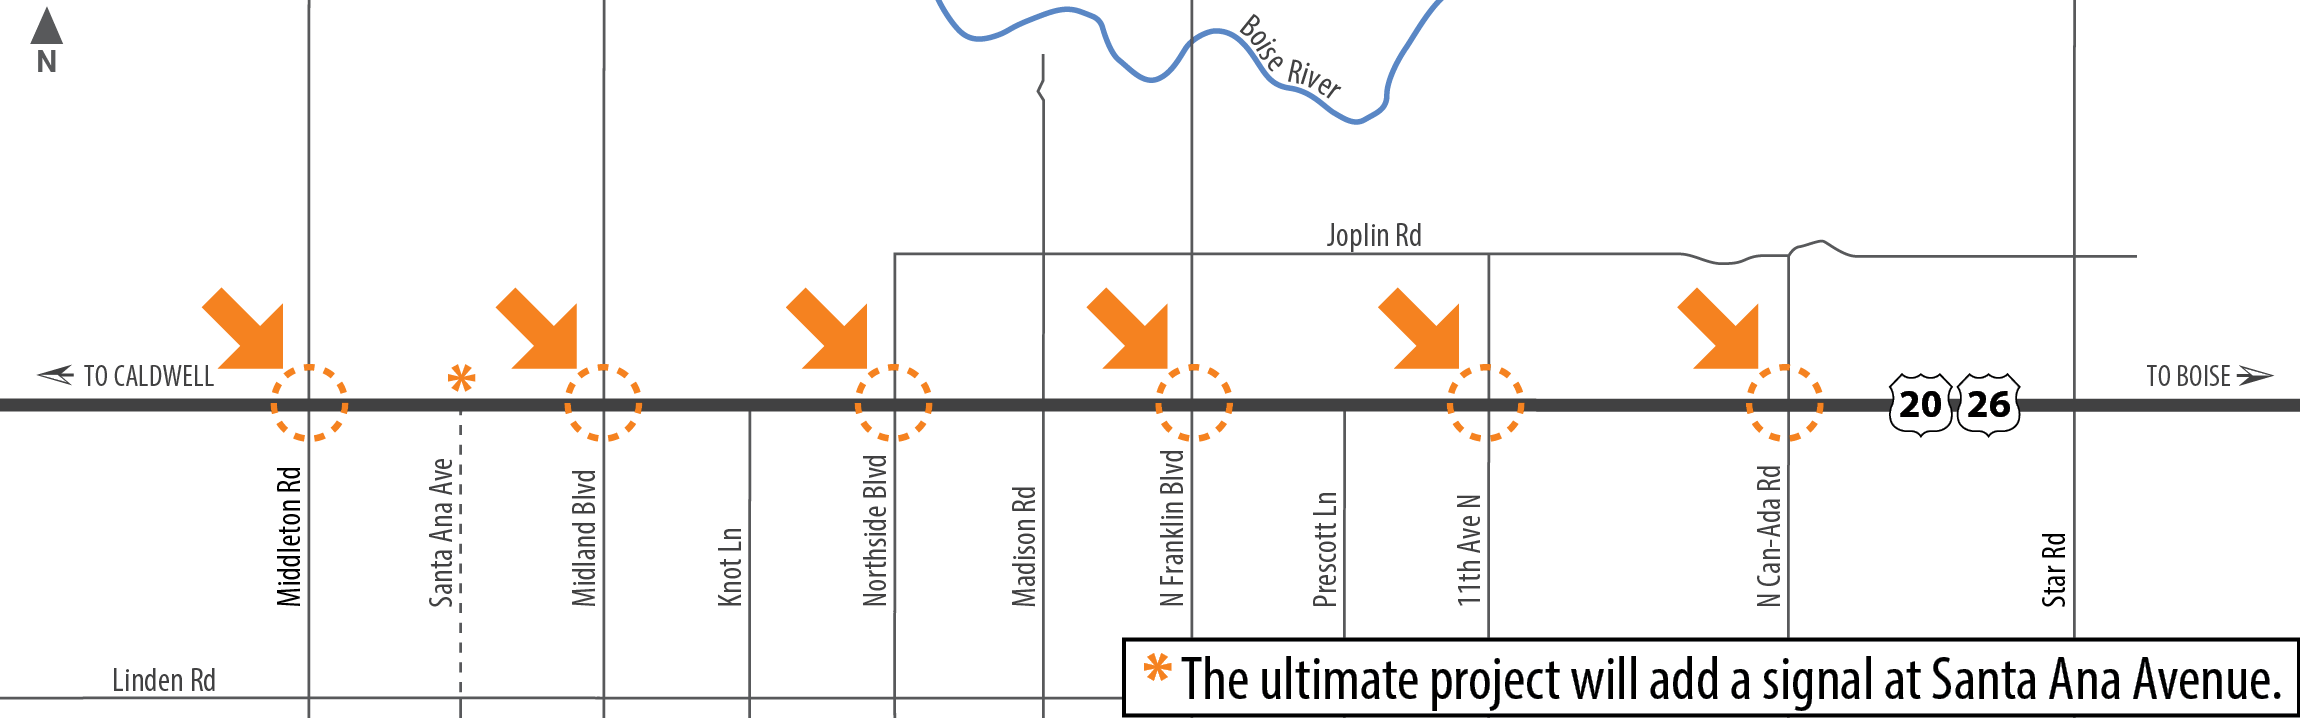 Intersection improvement maps shows intersection improvements at Middleton Road, Midland Boulevard, Northside Boulevard, North Franklin Boulevard, 11th Avenue North and North Can-Ada Road. The ultimate project will add a signal at Santa Ana Avenue.